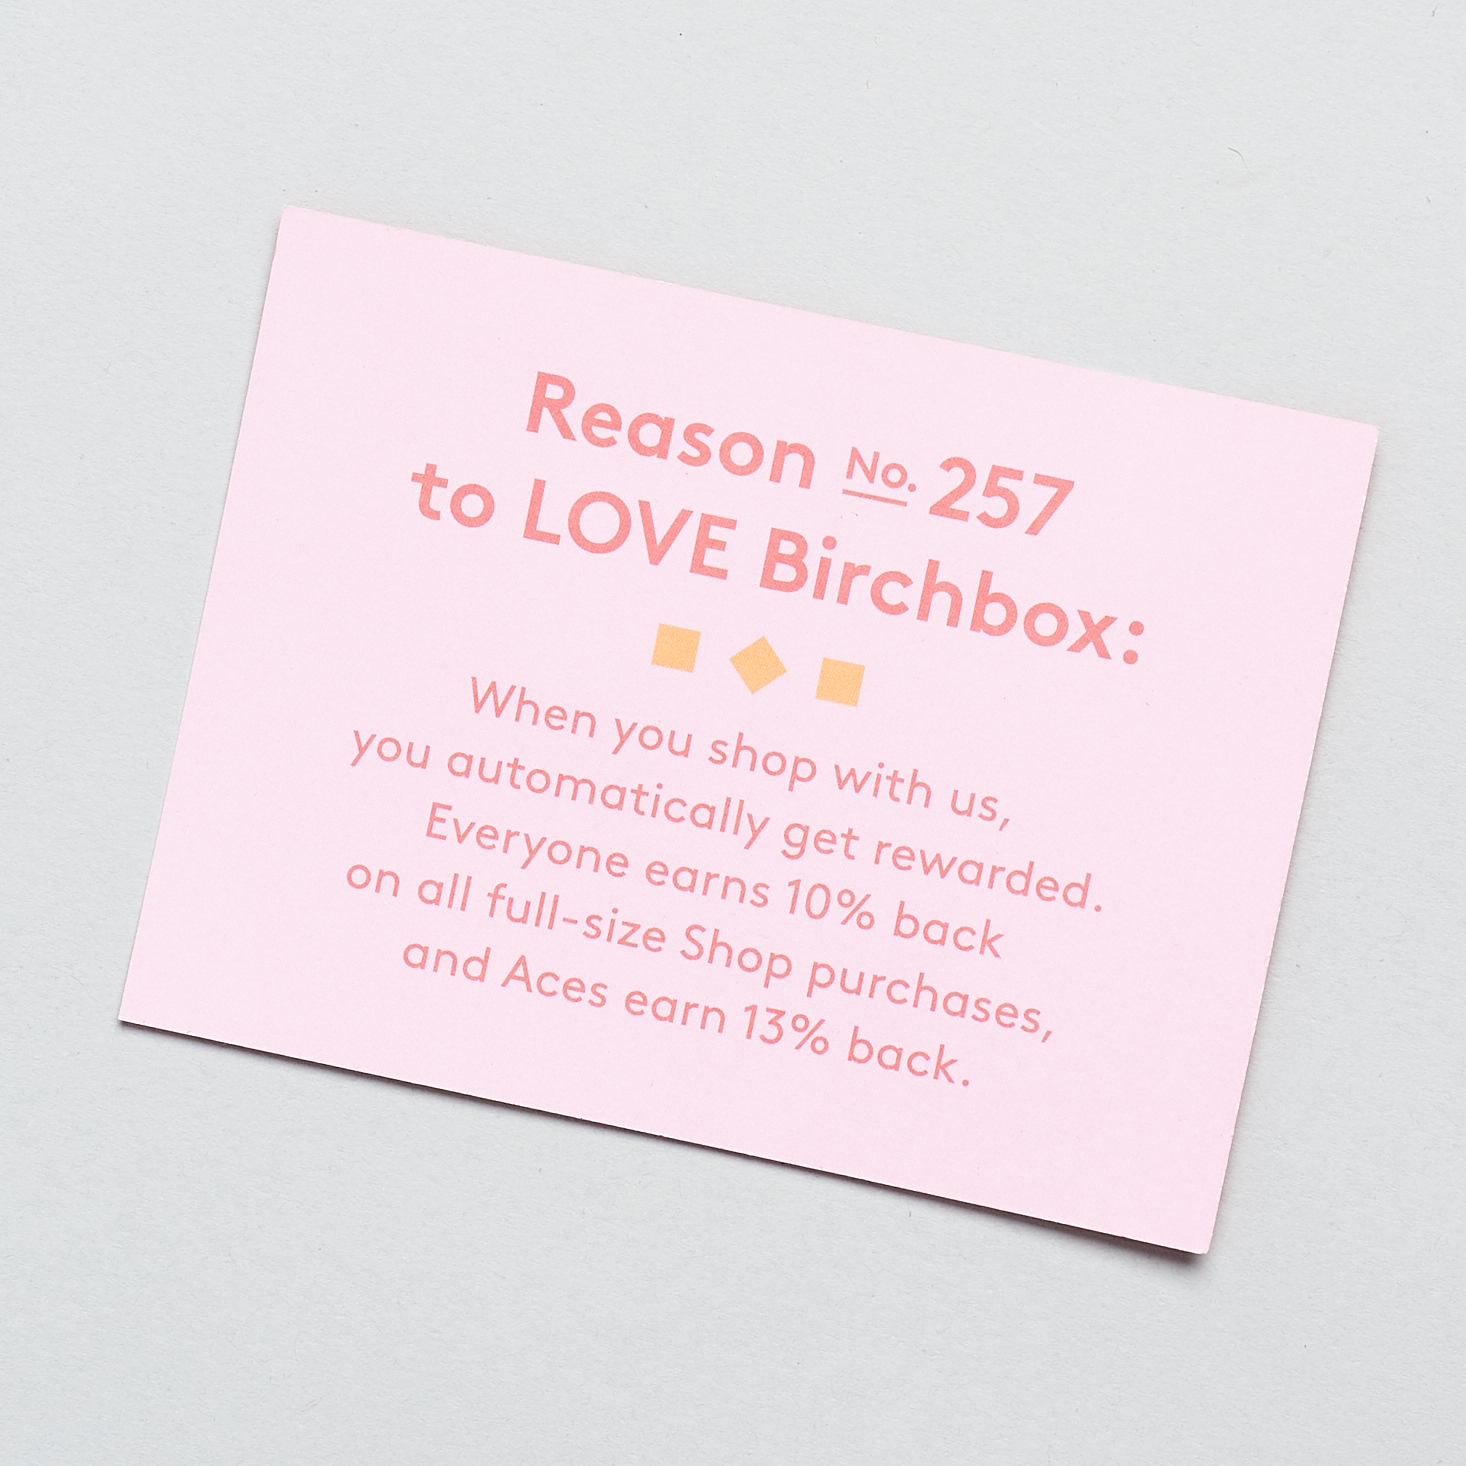 Birchbox Curated 3 August extra points card back